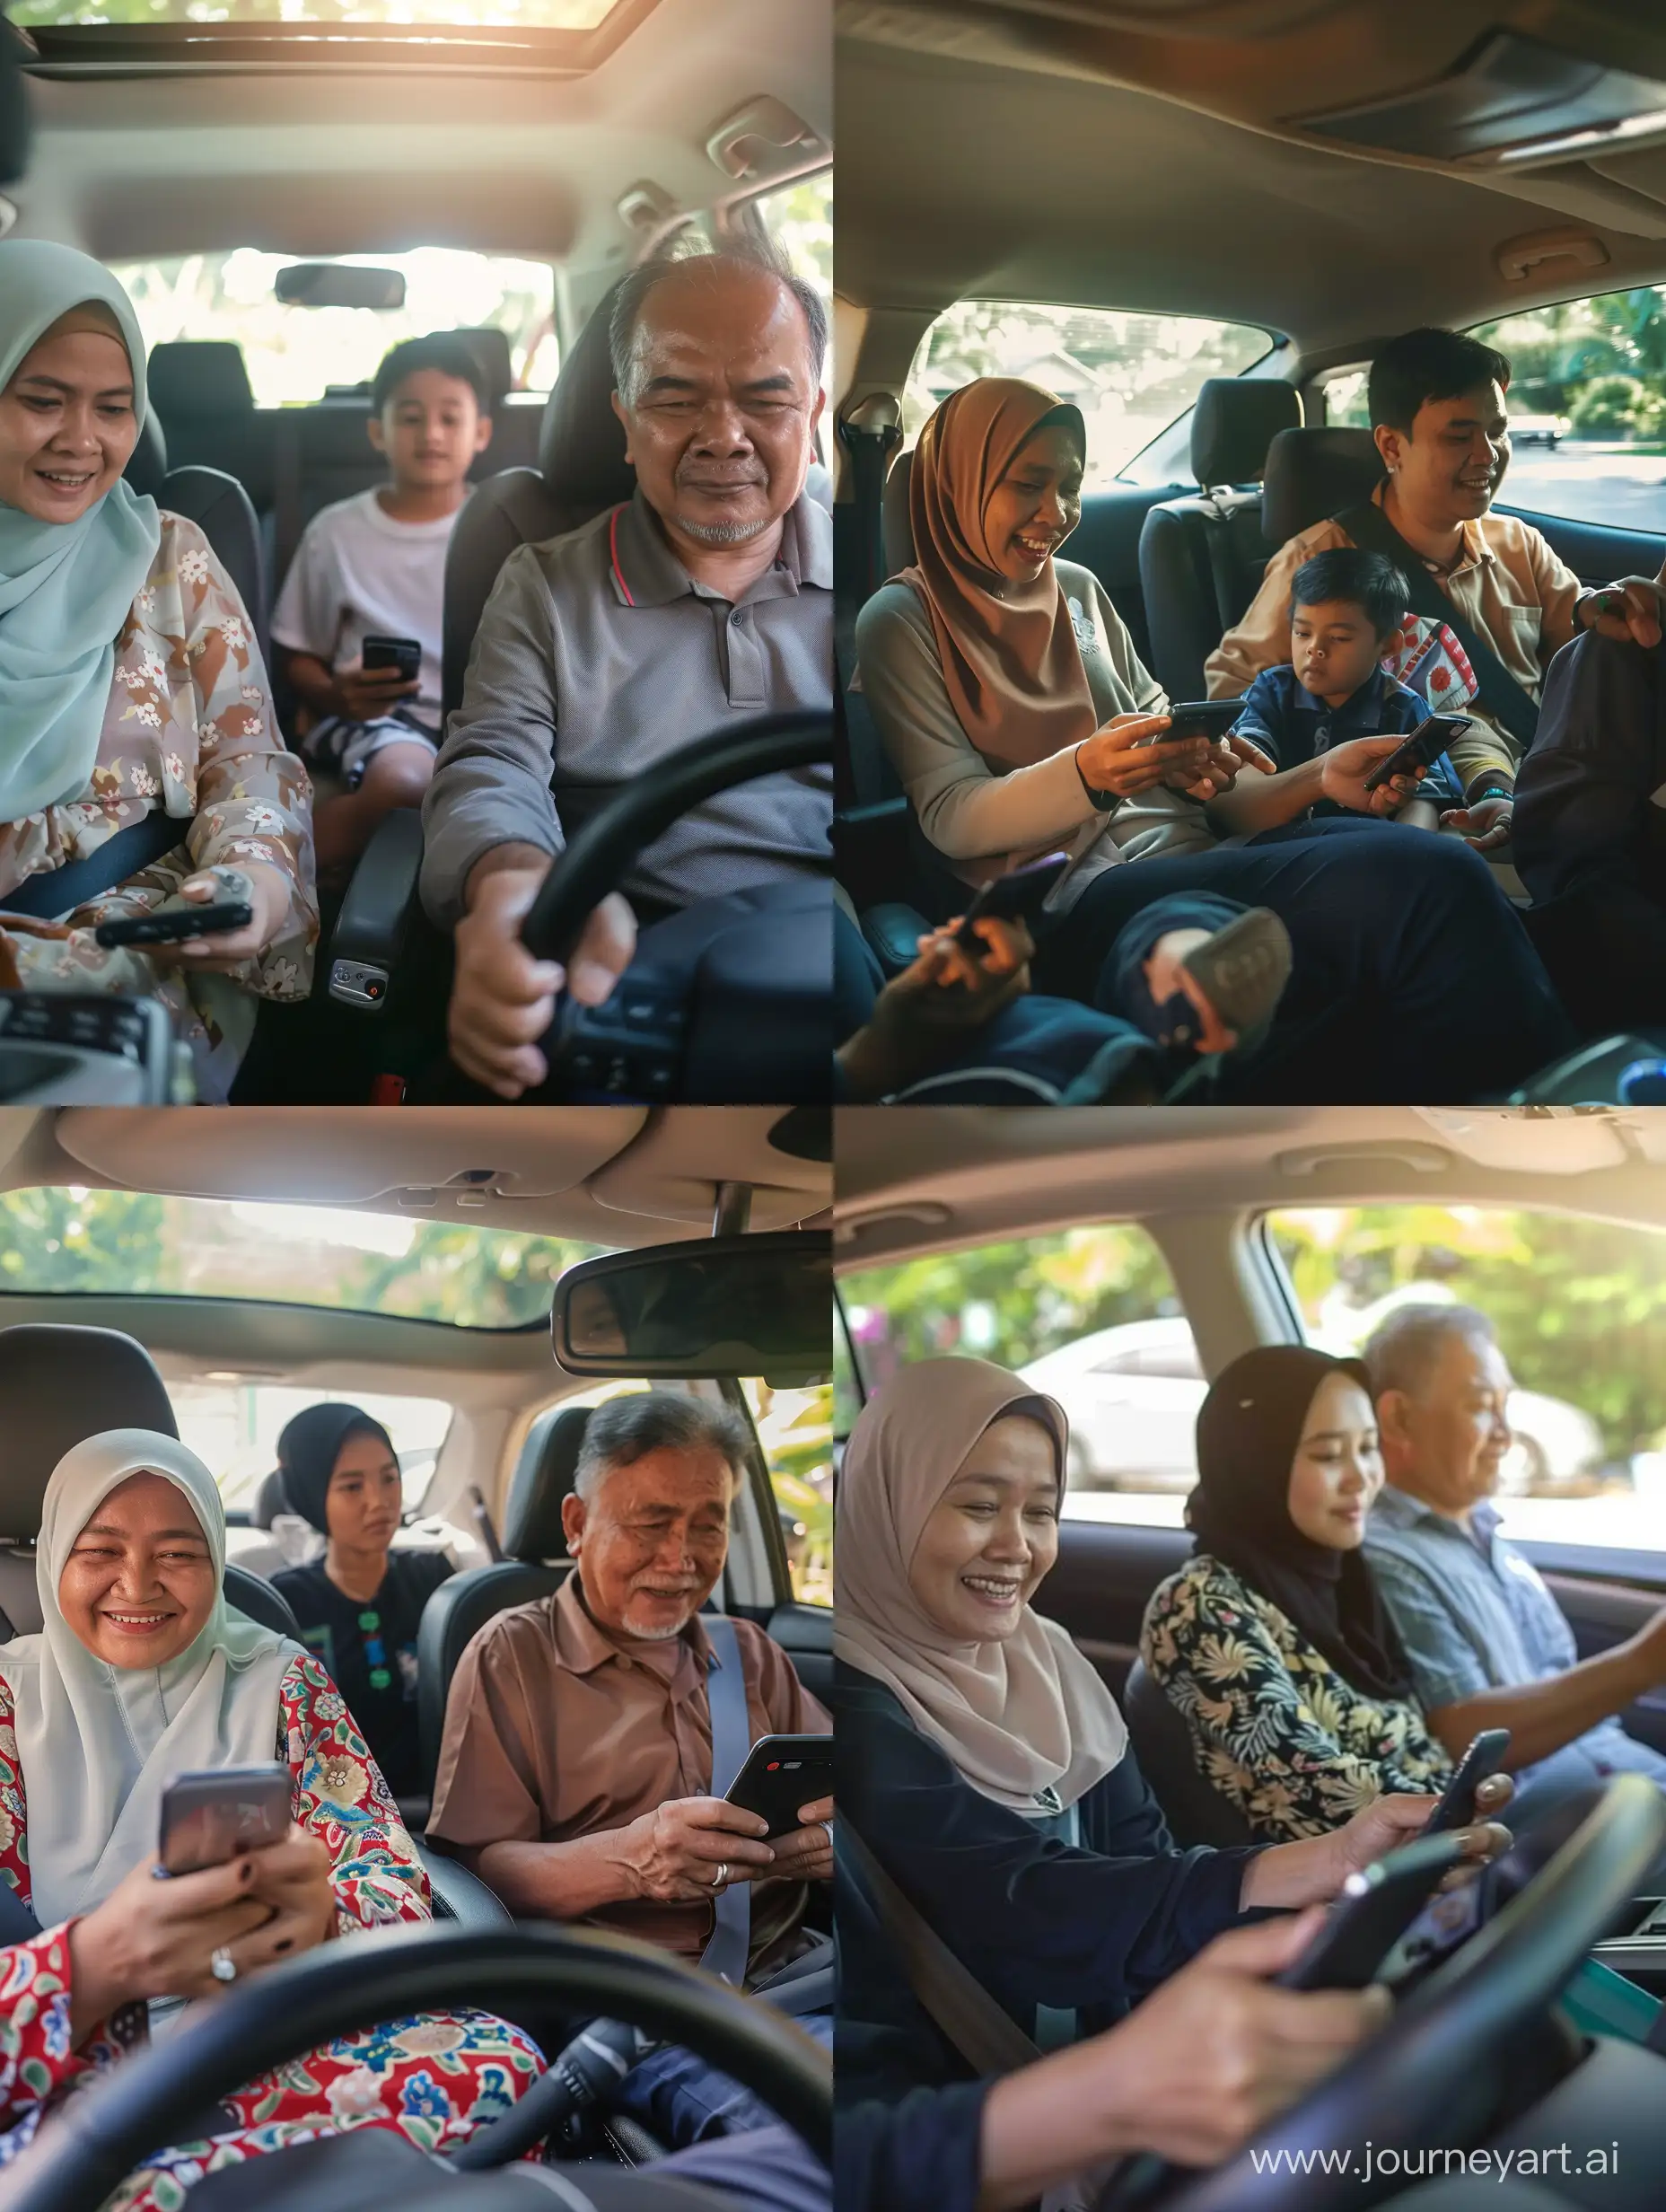 atmosphere in the car. malay family. mother sitting on the left looking at the mobile phone and smiling. his two teenage children sitting in the back looking at each other's cell phones. mother wears a hijab. only Dad was driving with a sleepy face and not holding his mobile phone while looking ahead. they are on their way to vacation. there is sunlight